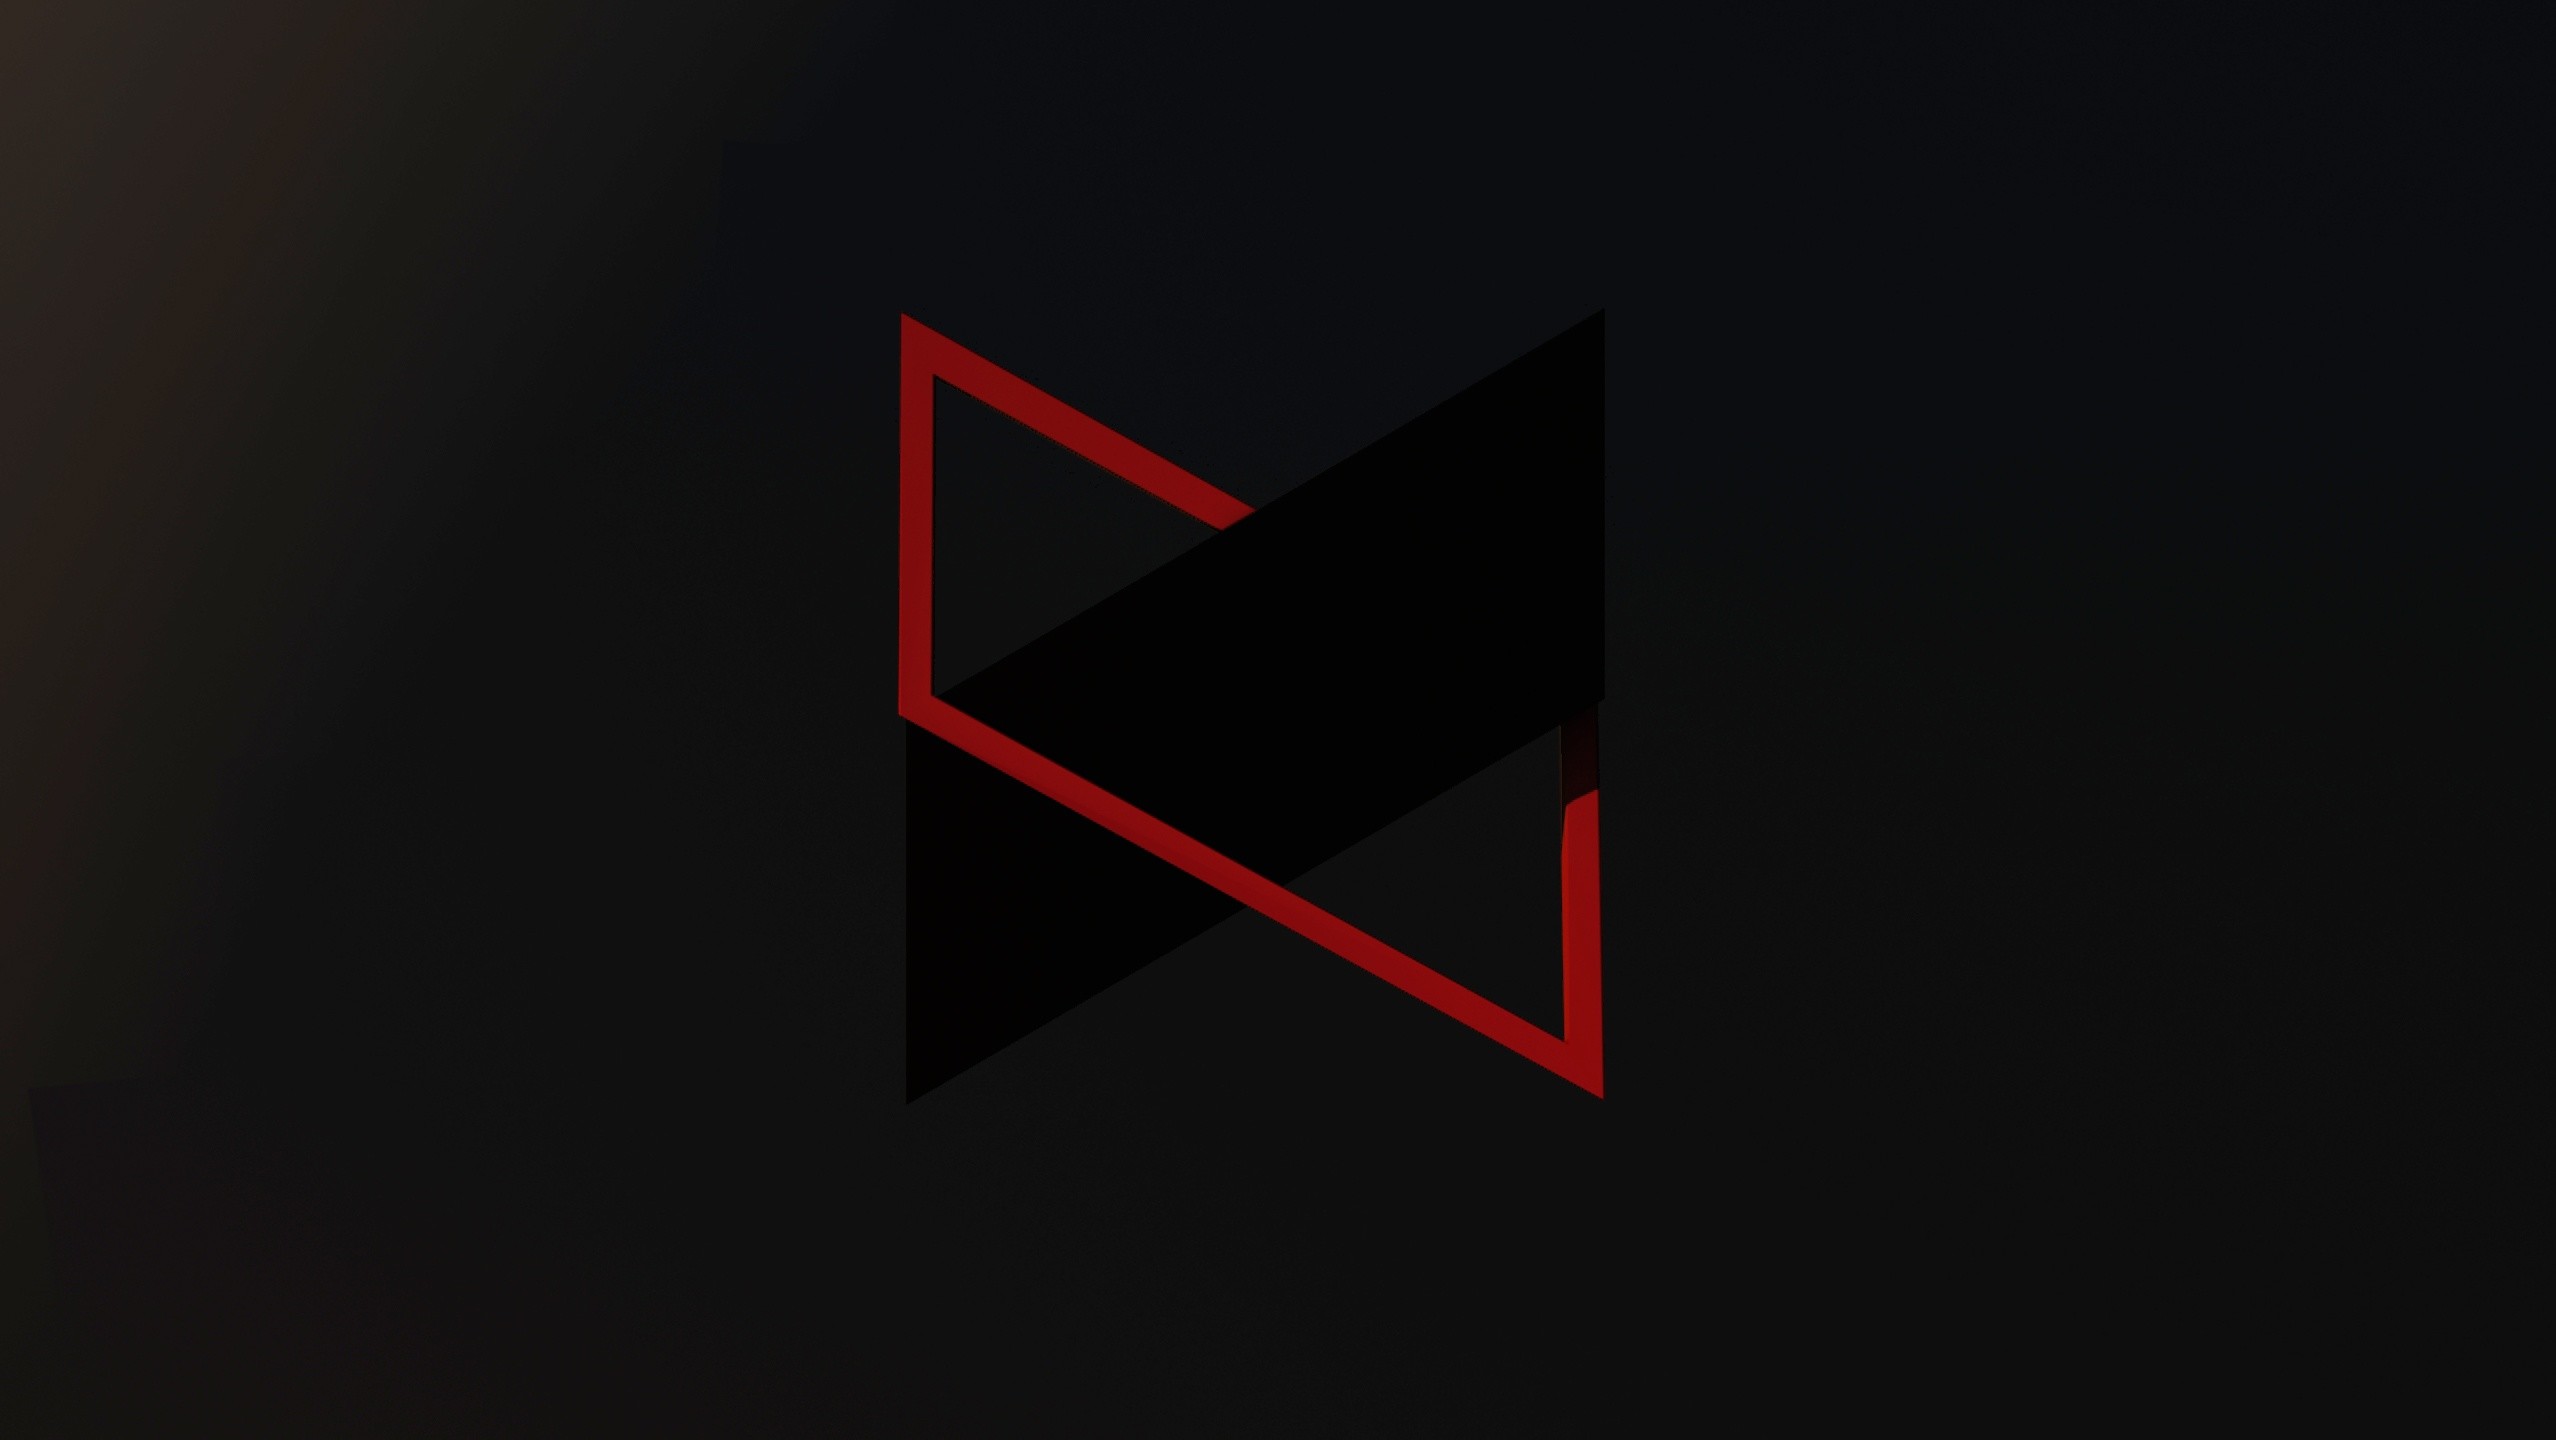 Mkbhd wallpaper images 13